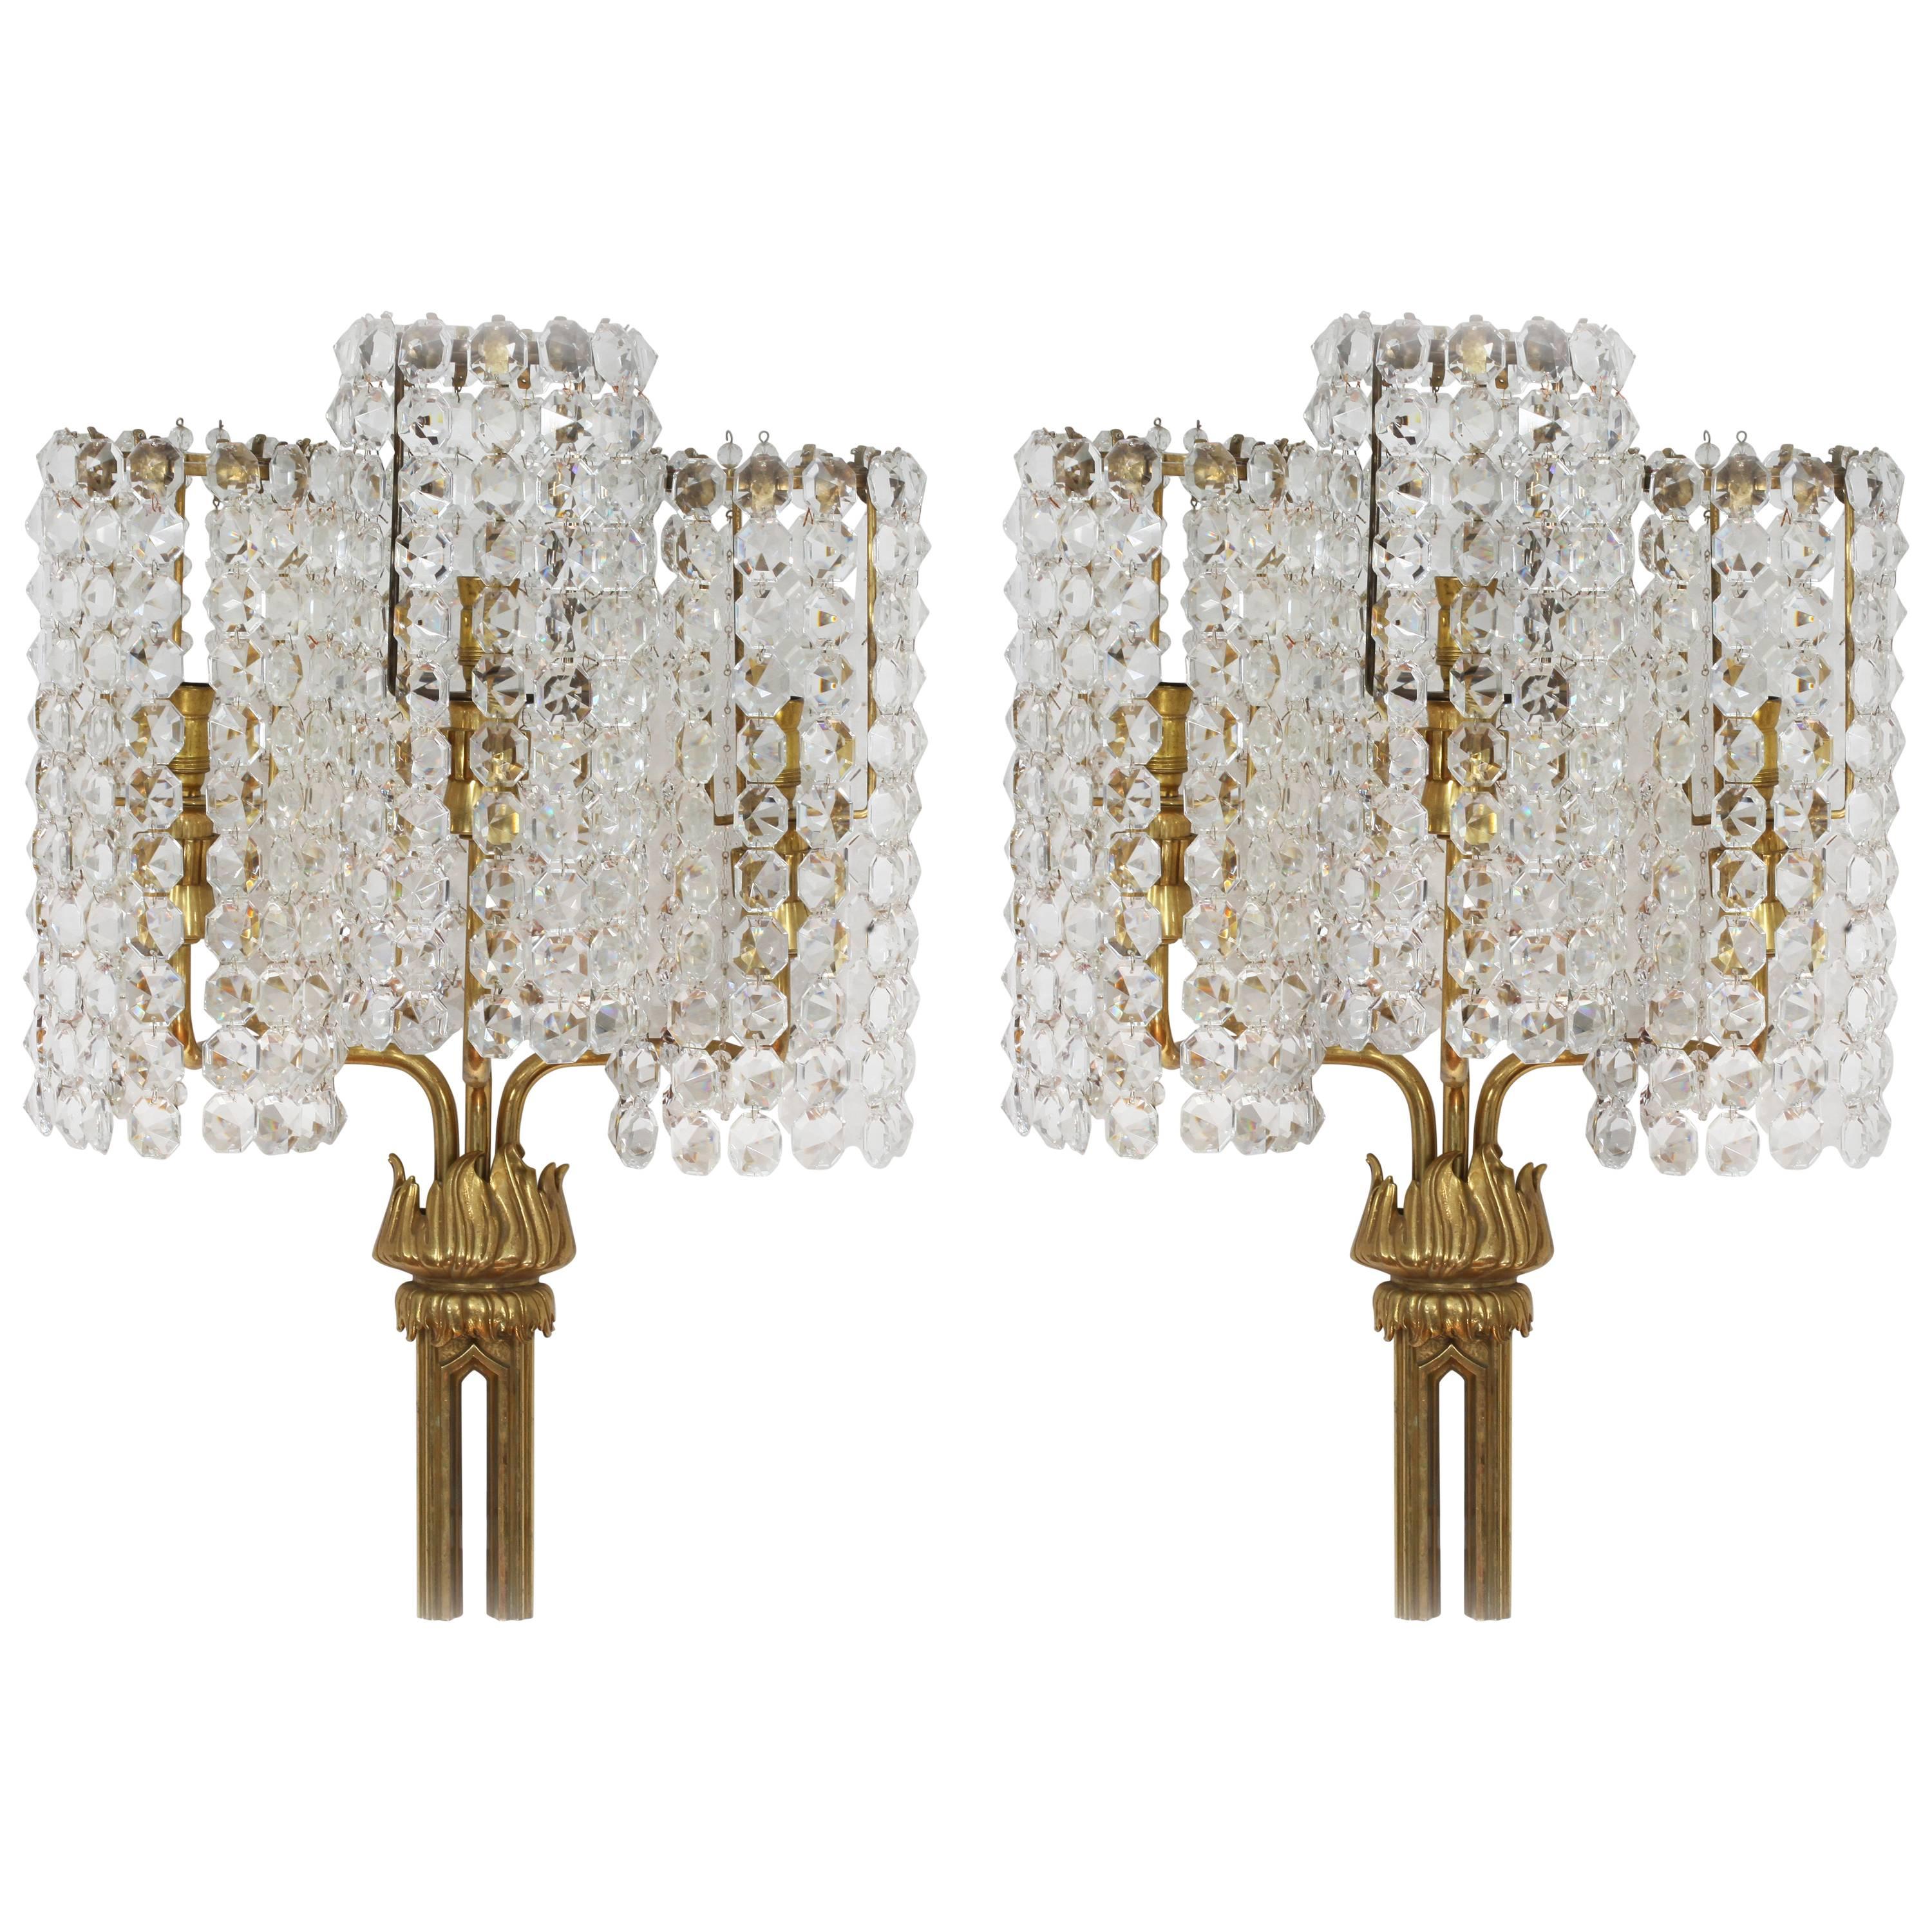 Amazing Large Pair of Wall Crystal Glass Sconces, Bakalowits Attributed, Vienna